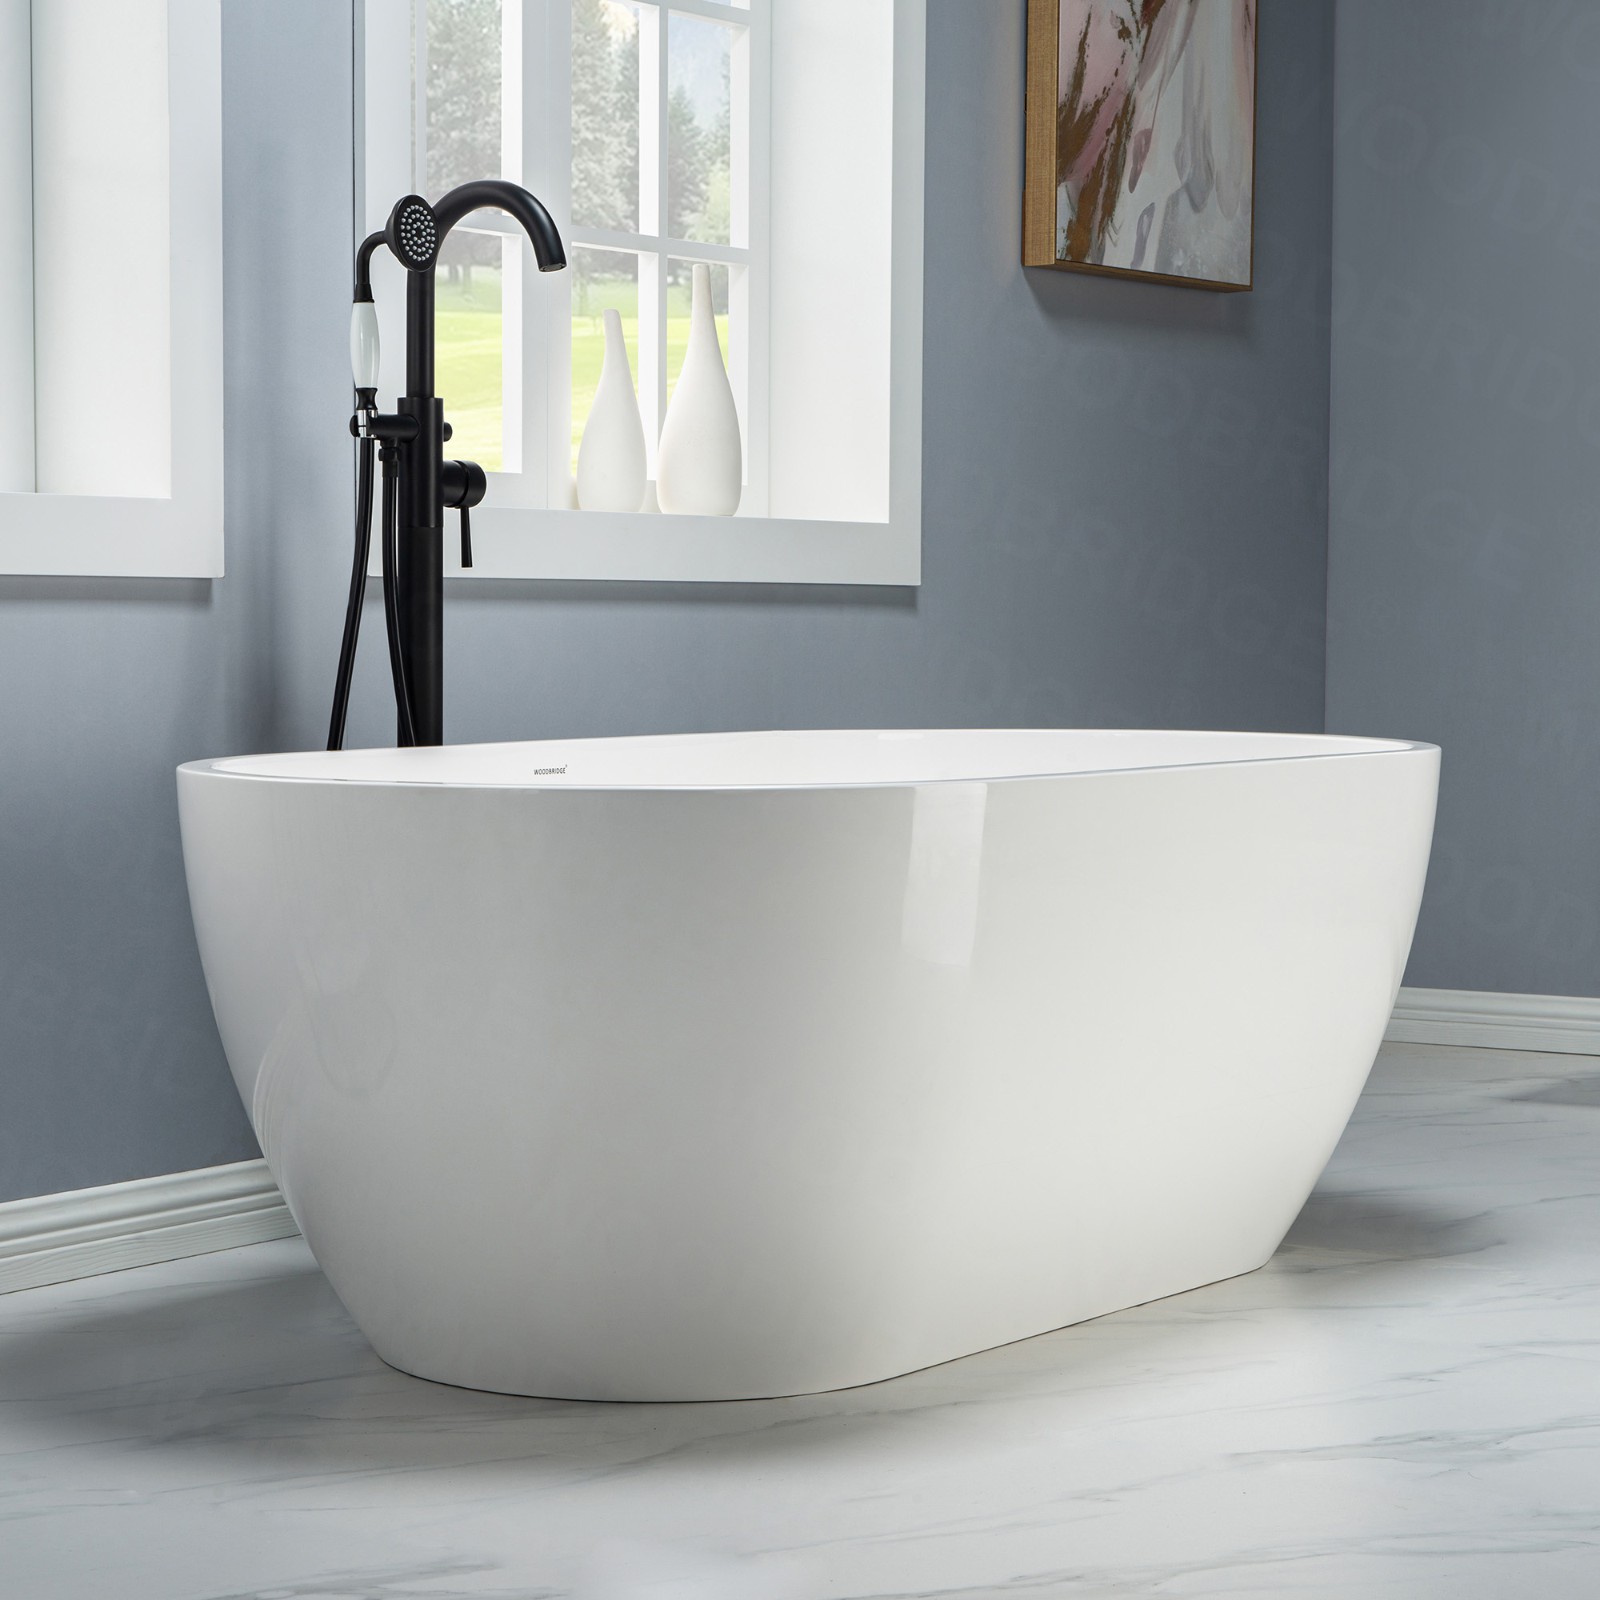  WOODBRIDGE 63 in. Freestanding Double Ended Solid Surface Soaking Bathtub with Center Drain Assembly and Overflow, B--51/BTA0051, Glossy White_8409